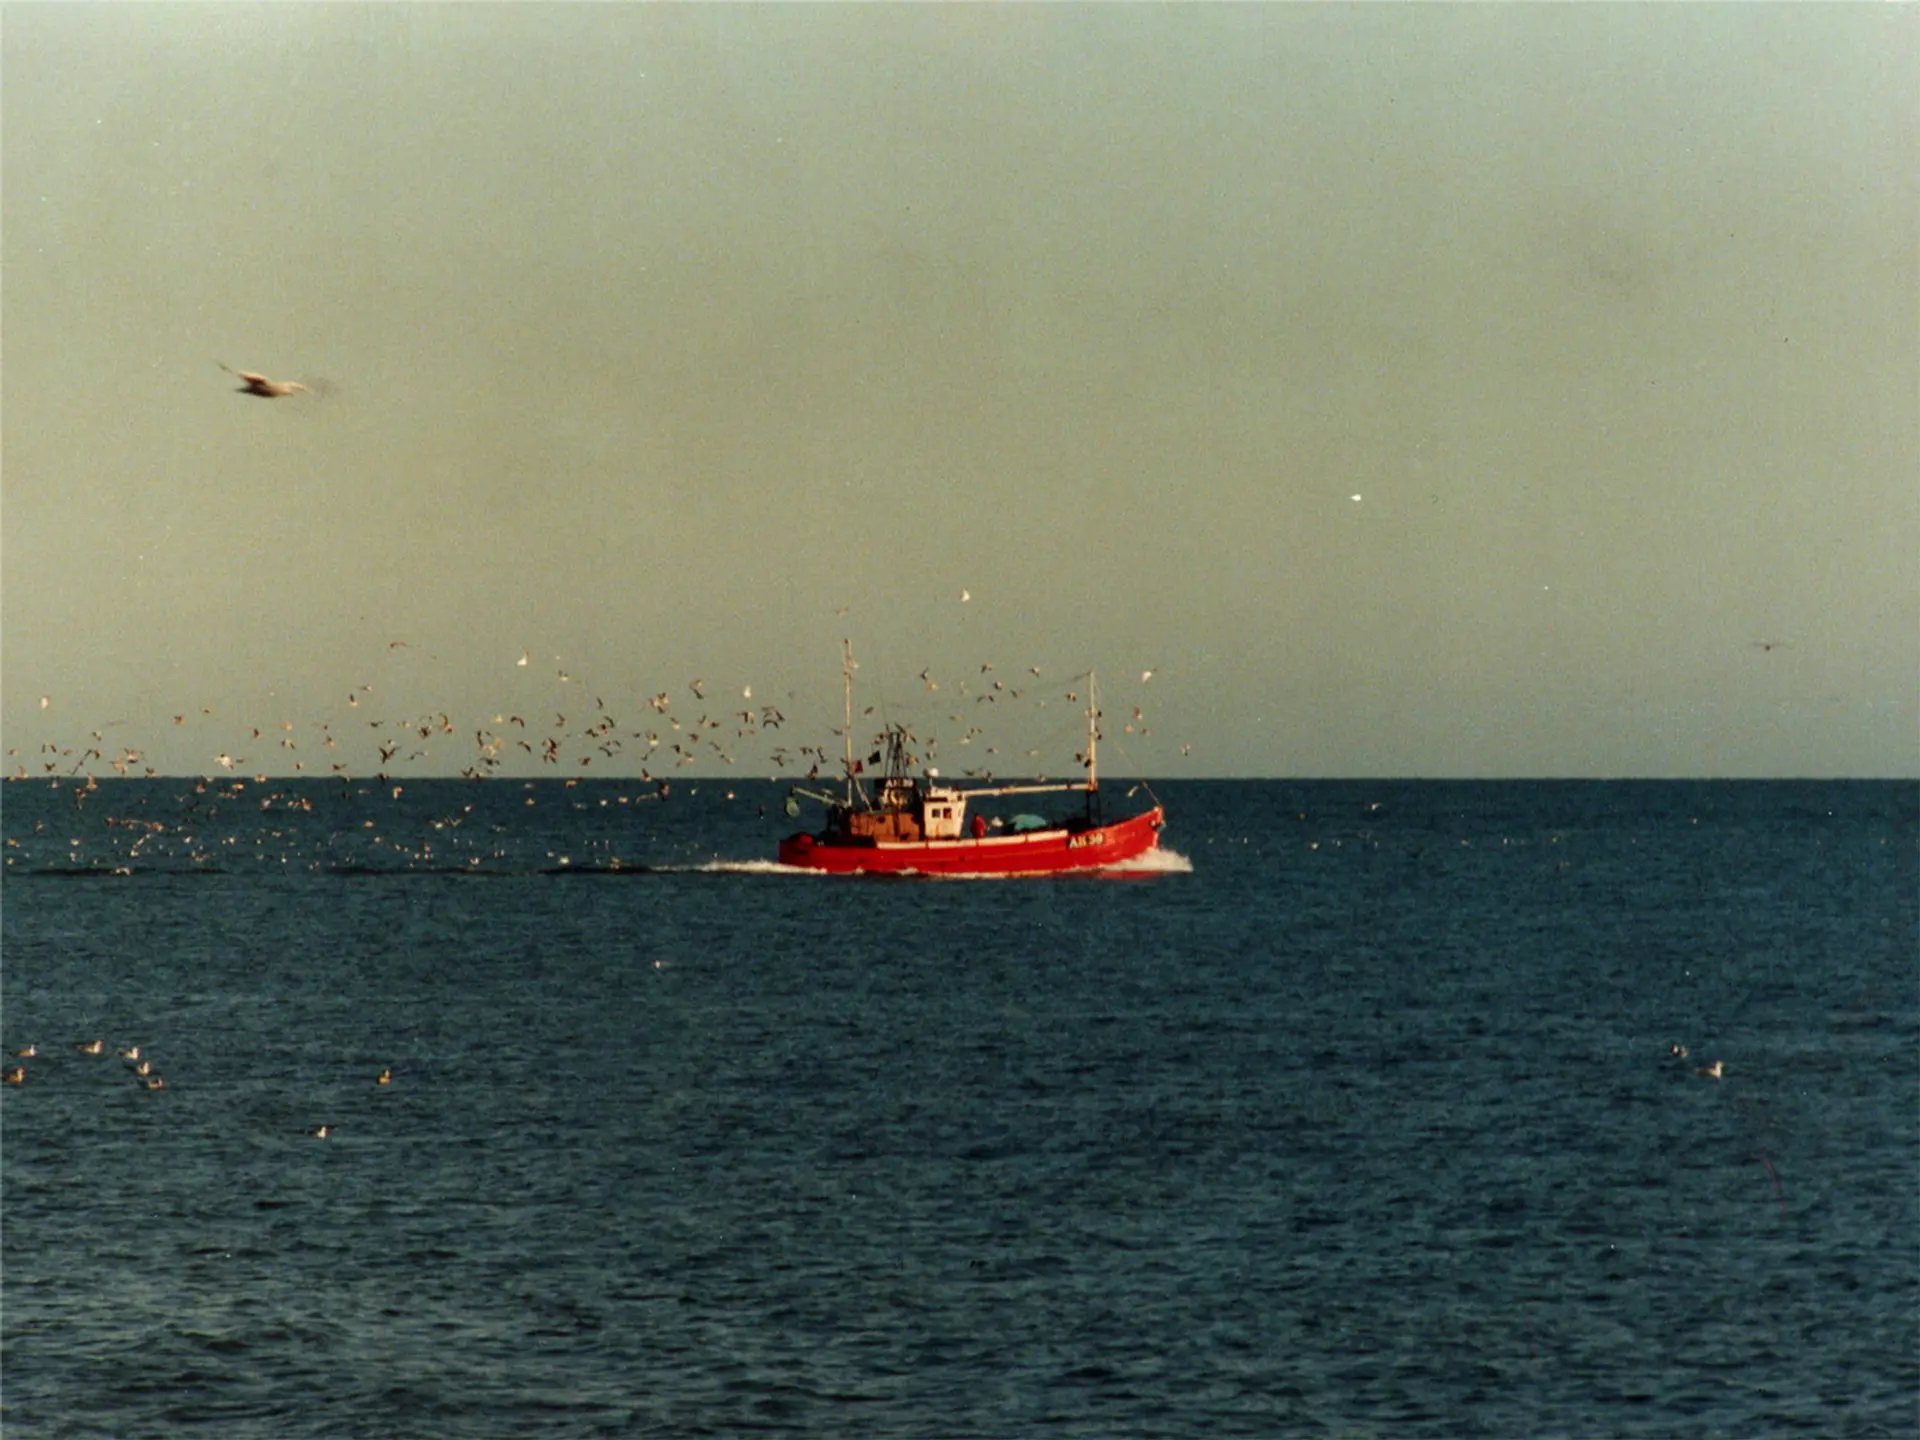 An old image of a red fishing boat at sea. There are lots of gulls following the boat. 